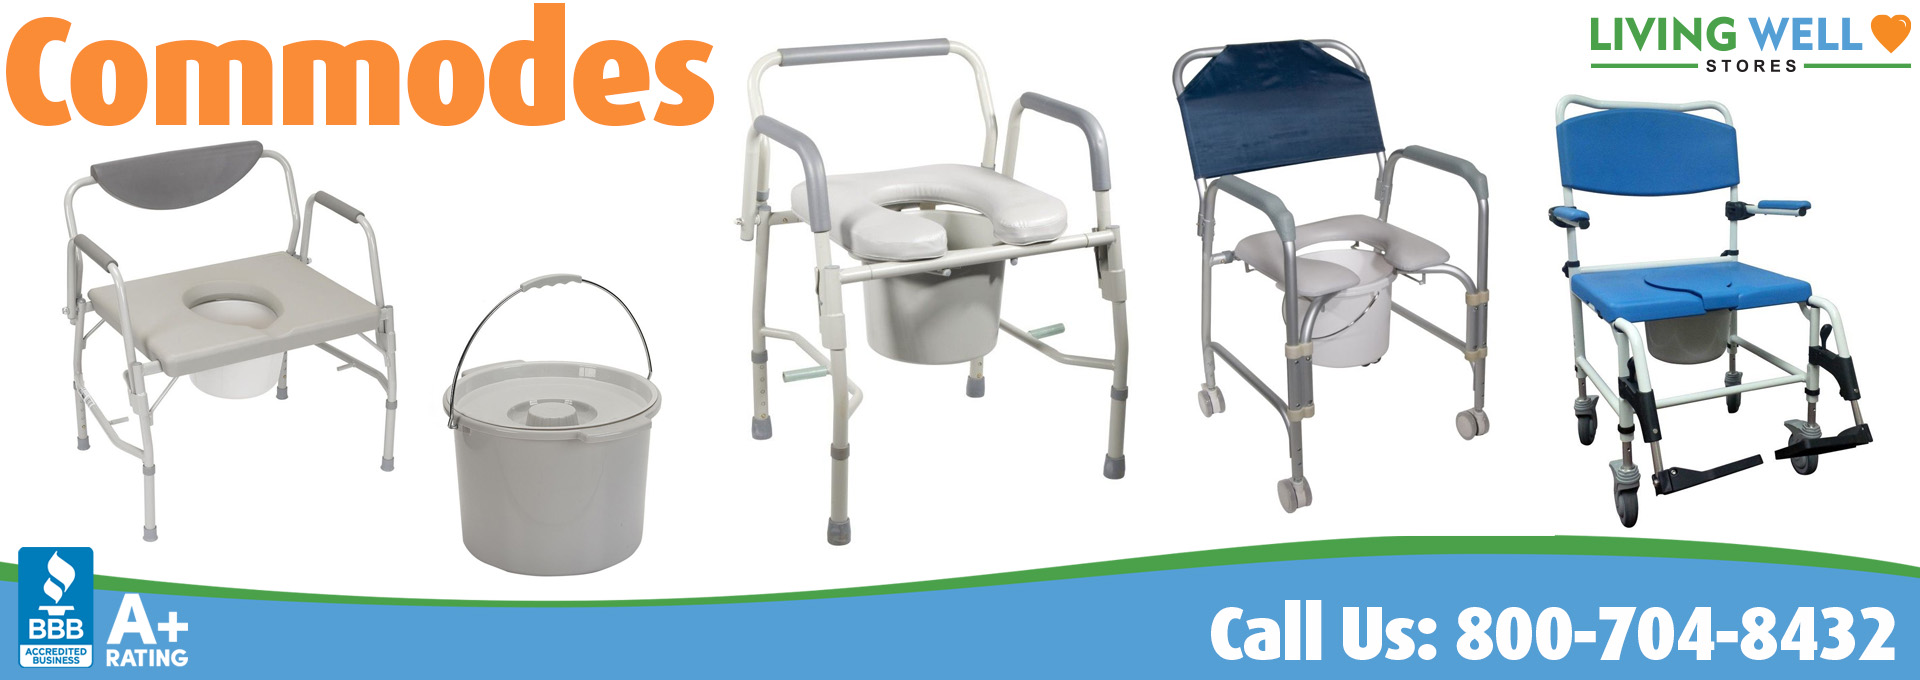 Living Well Stores: Commodes